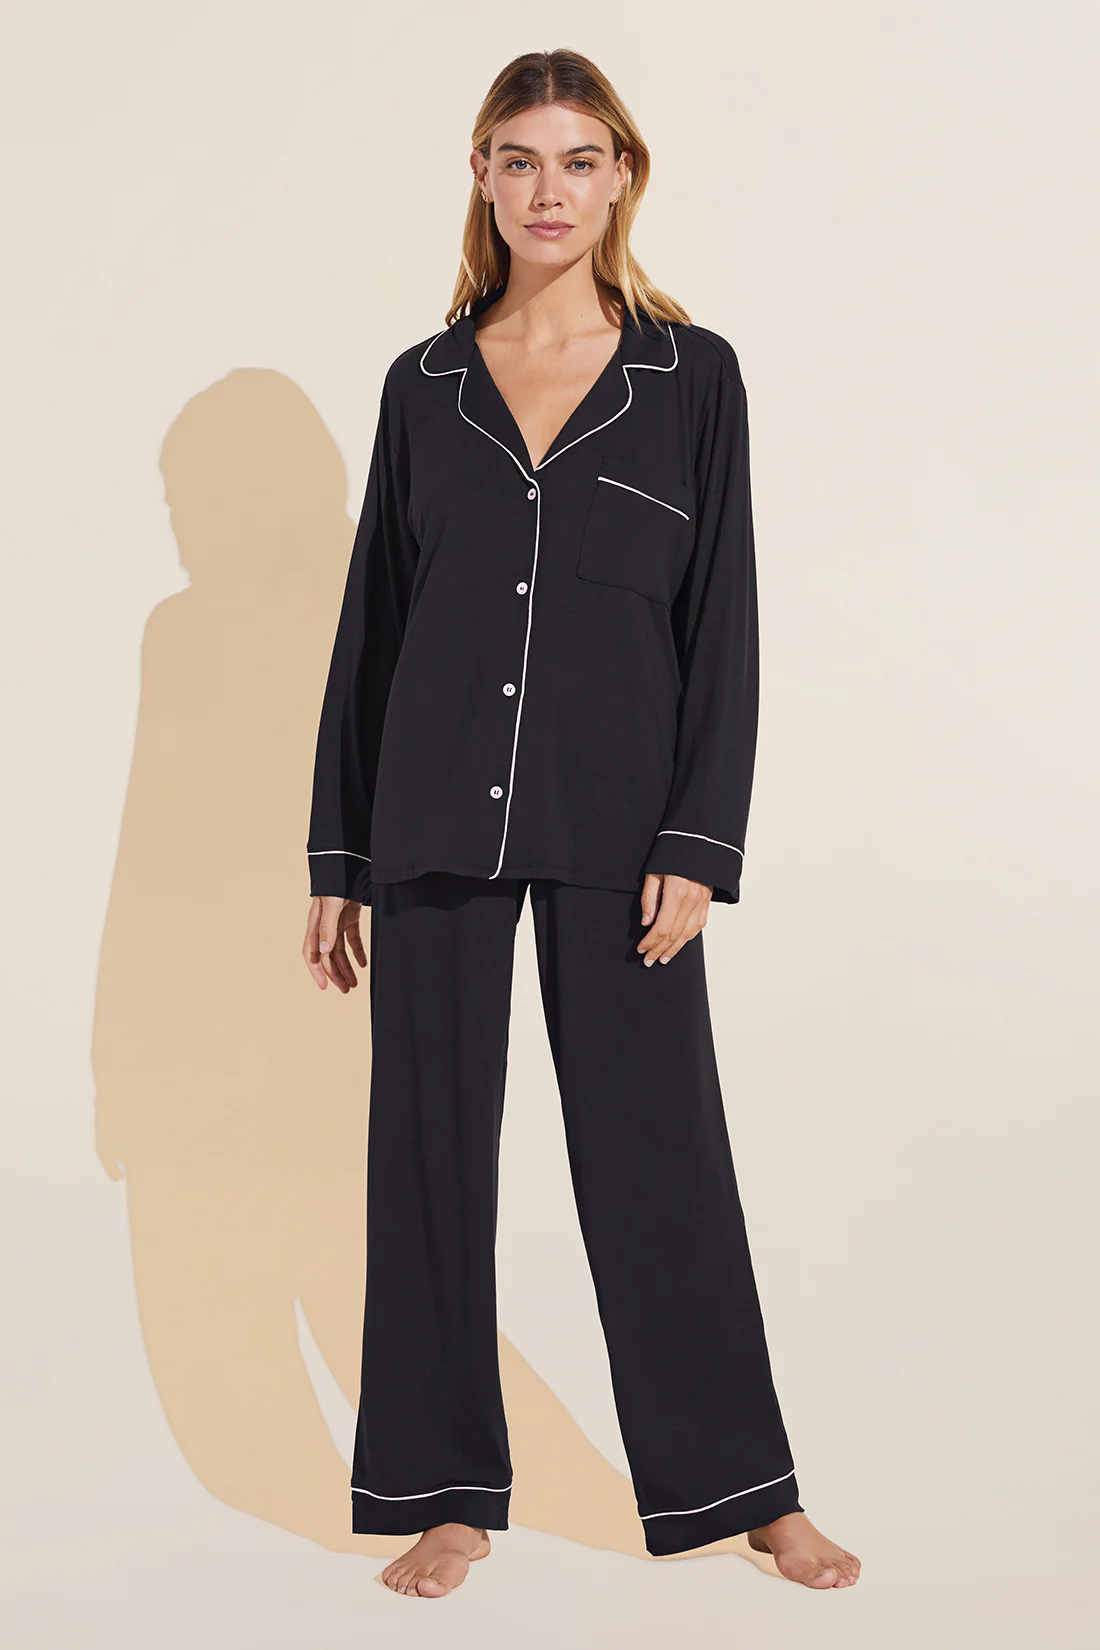 The best pajamas for women - Everyday Reading